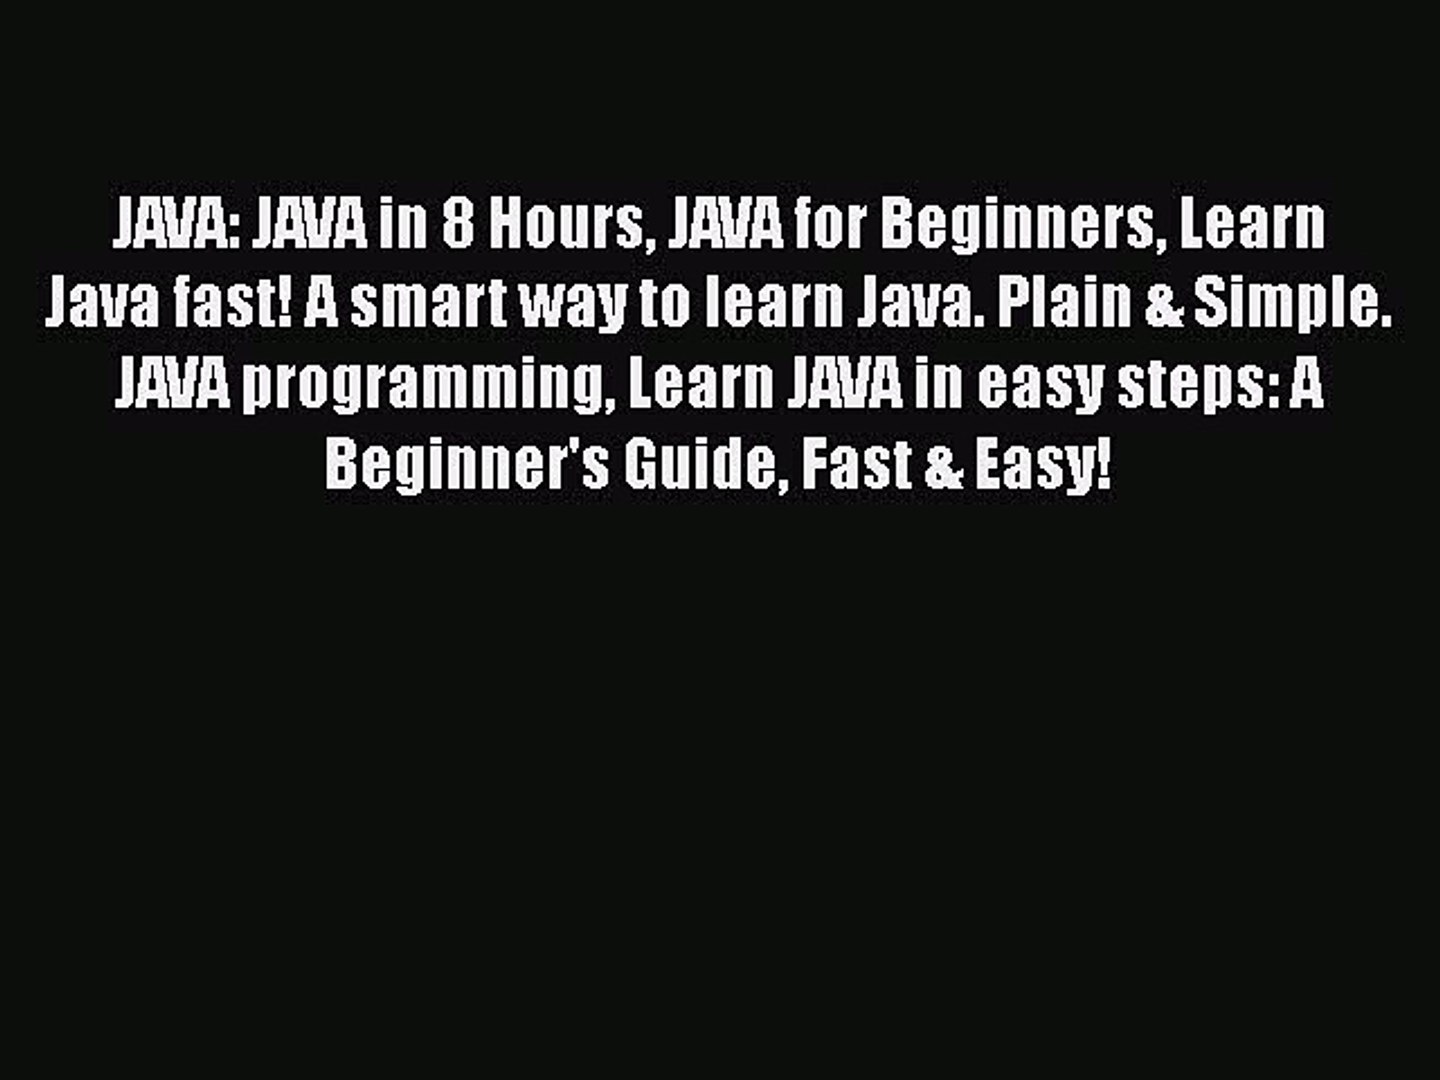 [Online PDF] JAVA: JAVA in 8 Hours JAVA for Beginners Learn Java fast! A smart way to learn